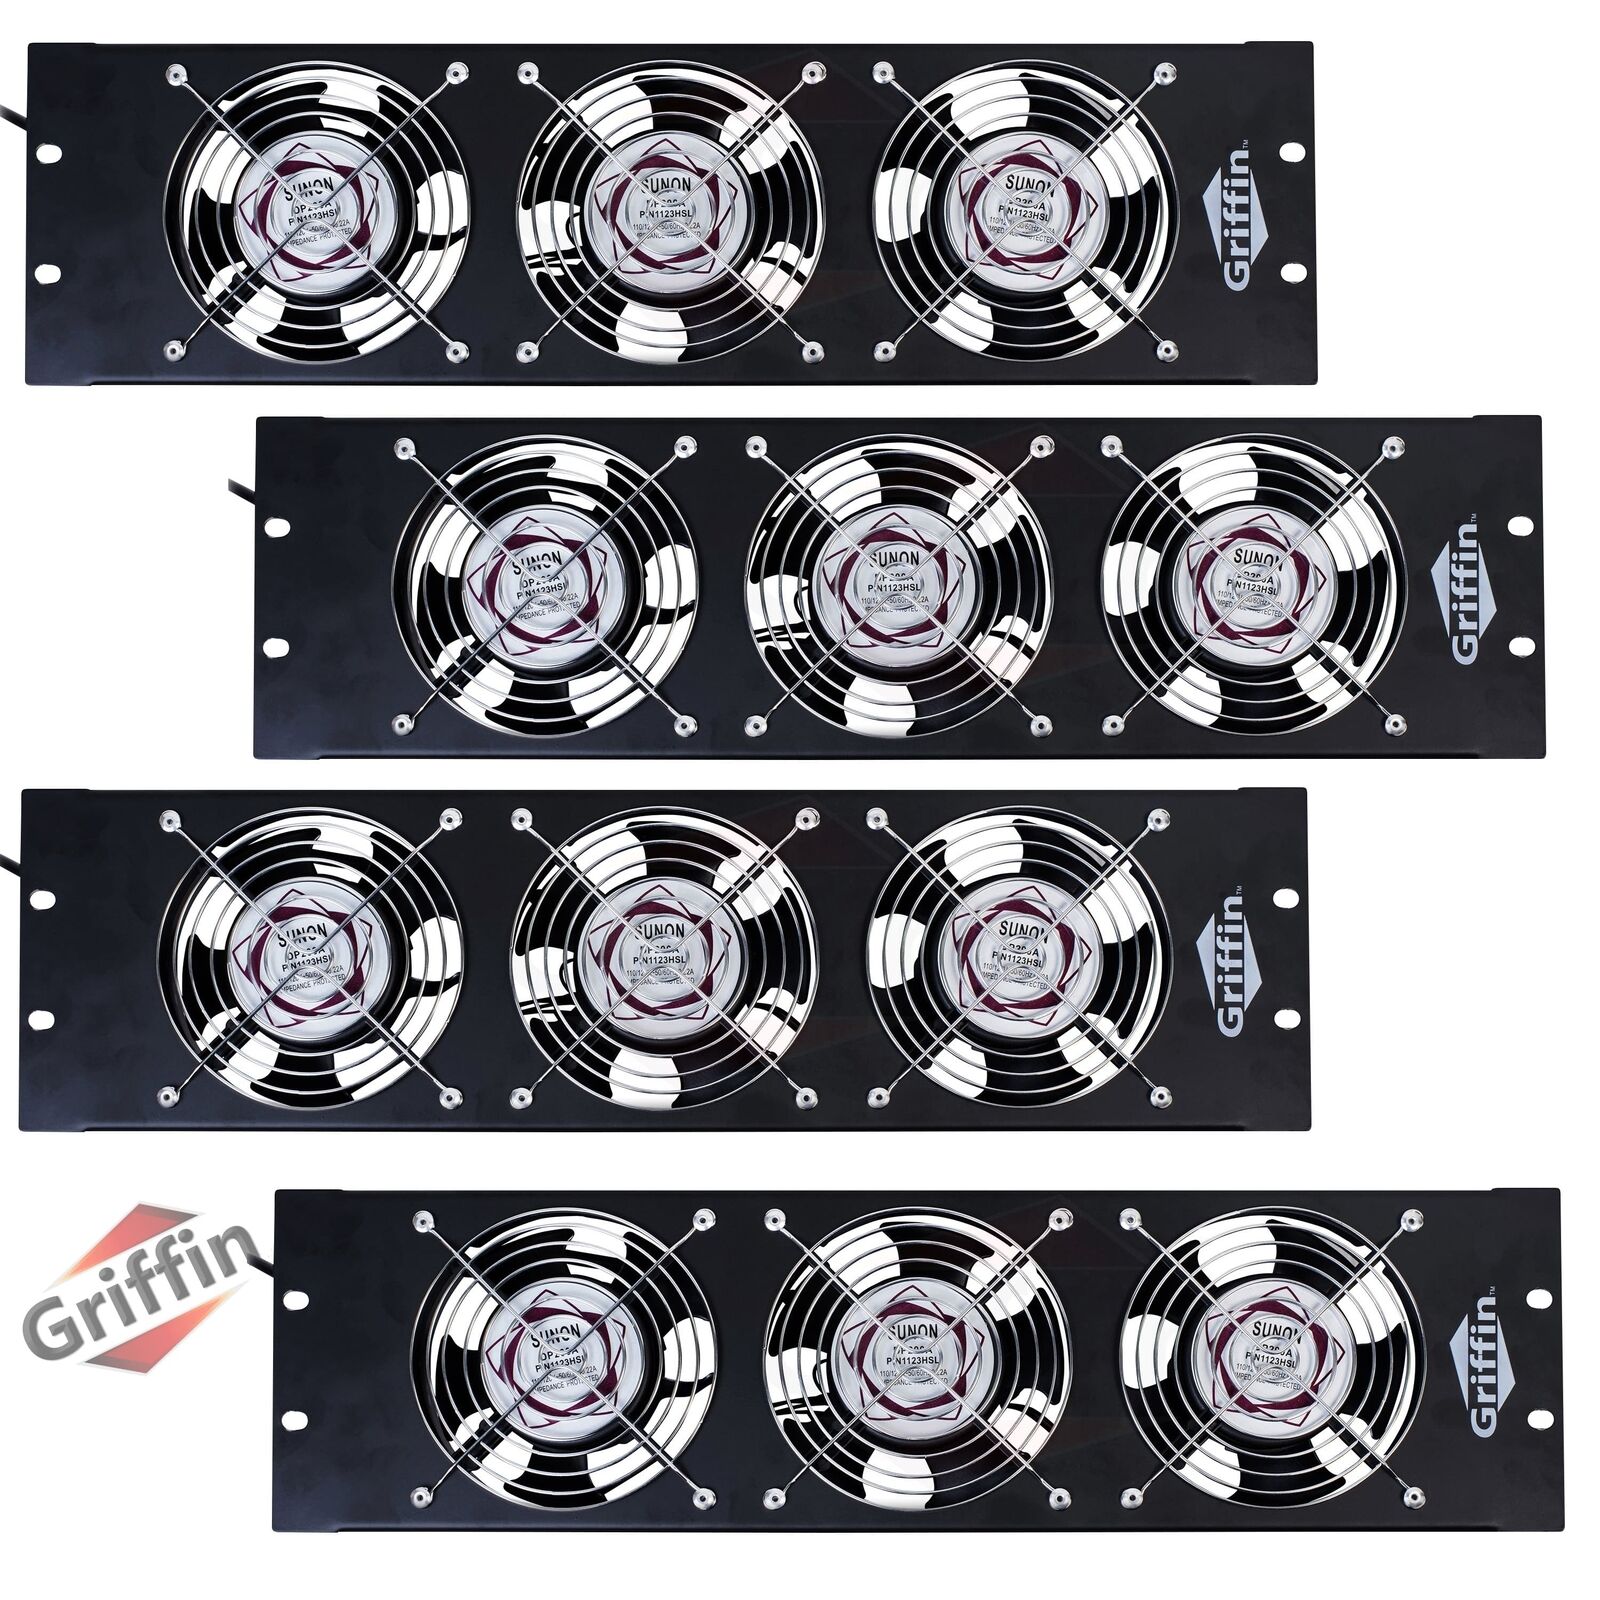 4 PACK Rackmount Cooling Fans | GRIFFIN Triple Studio Audio Gear Panel PA System